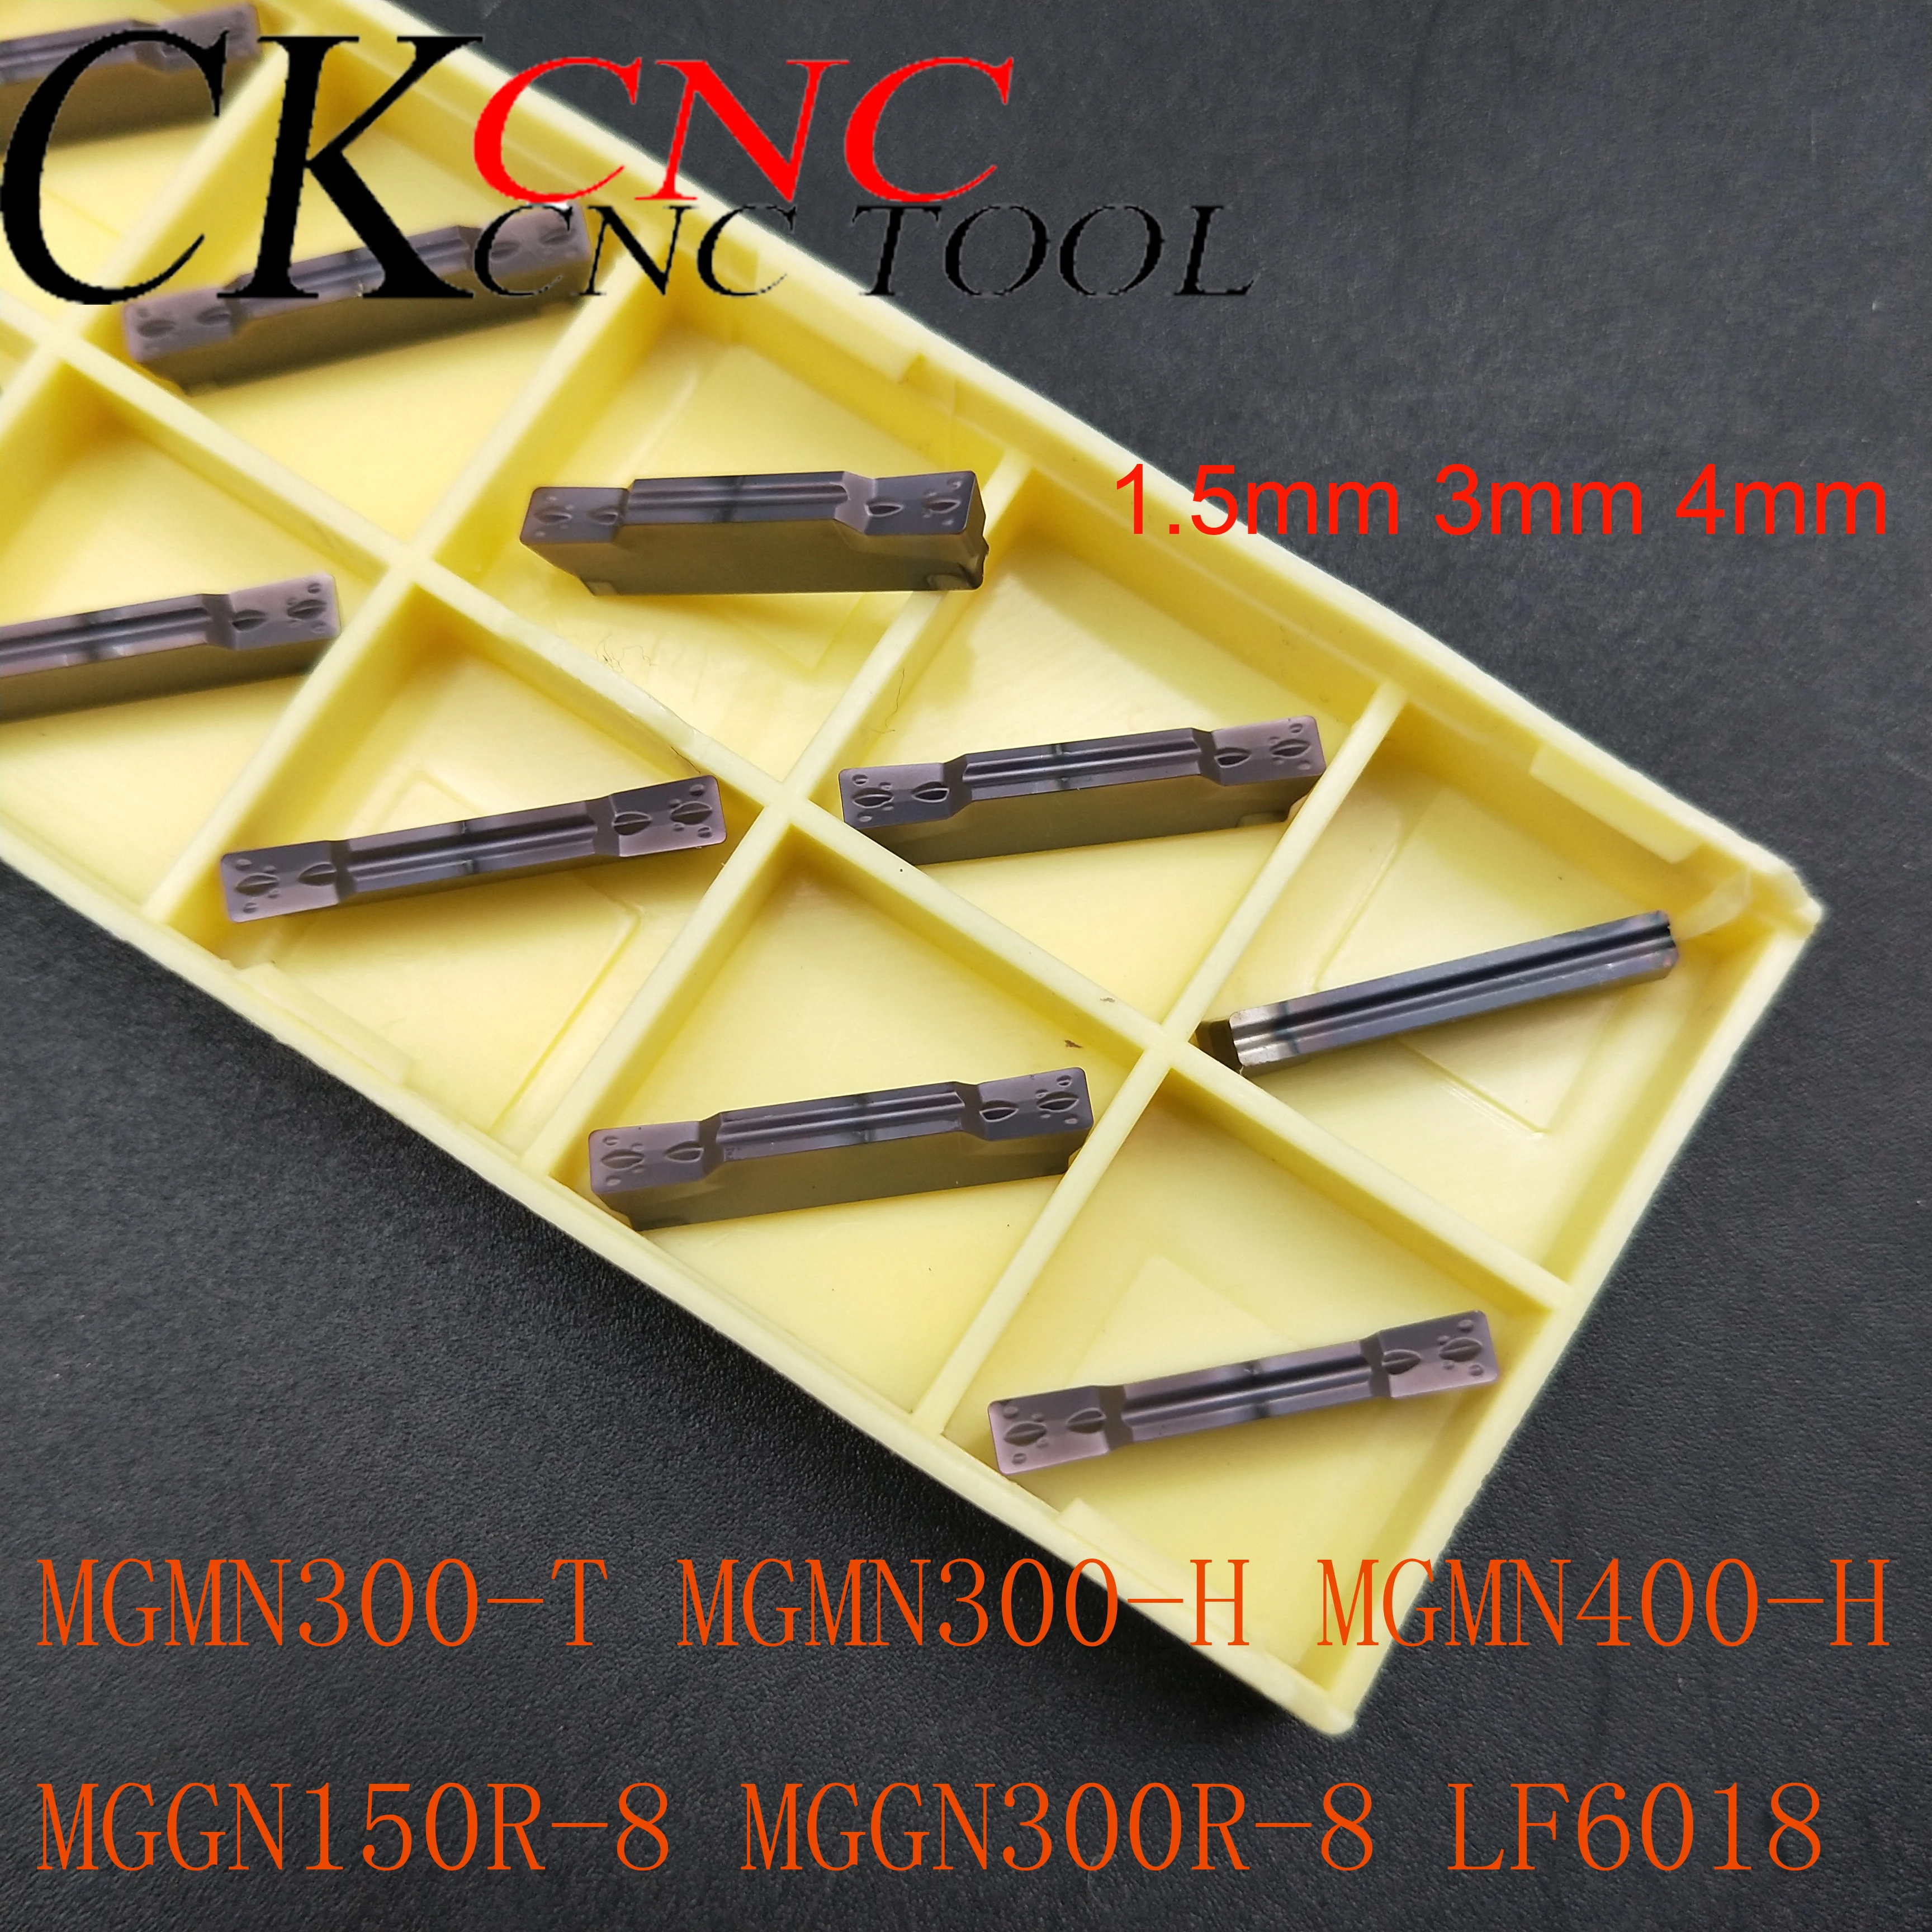 

MGMN300-T MGMN300-H MGMN400-H MGGN150R-8 MGGN300R-8 LF6018 cnc lathe Cutting off grooving blade for processing stainless steel